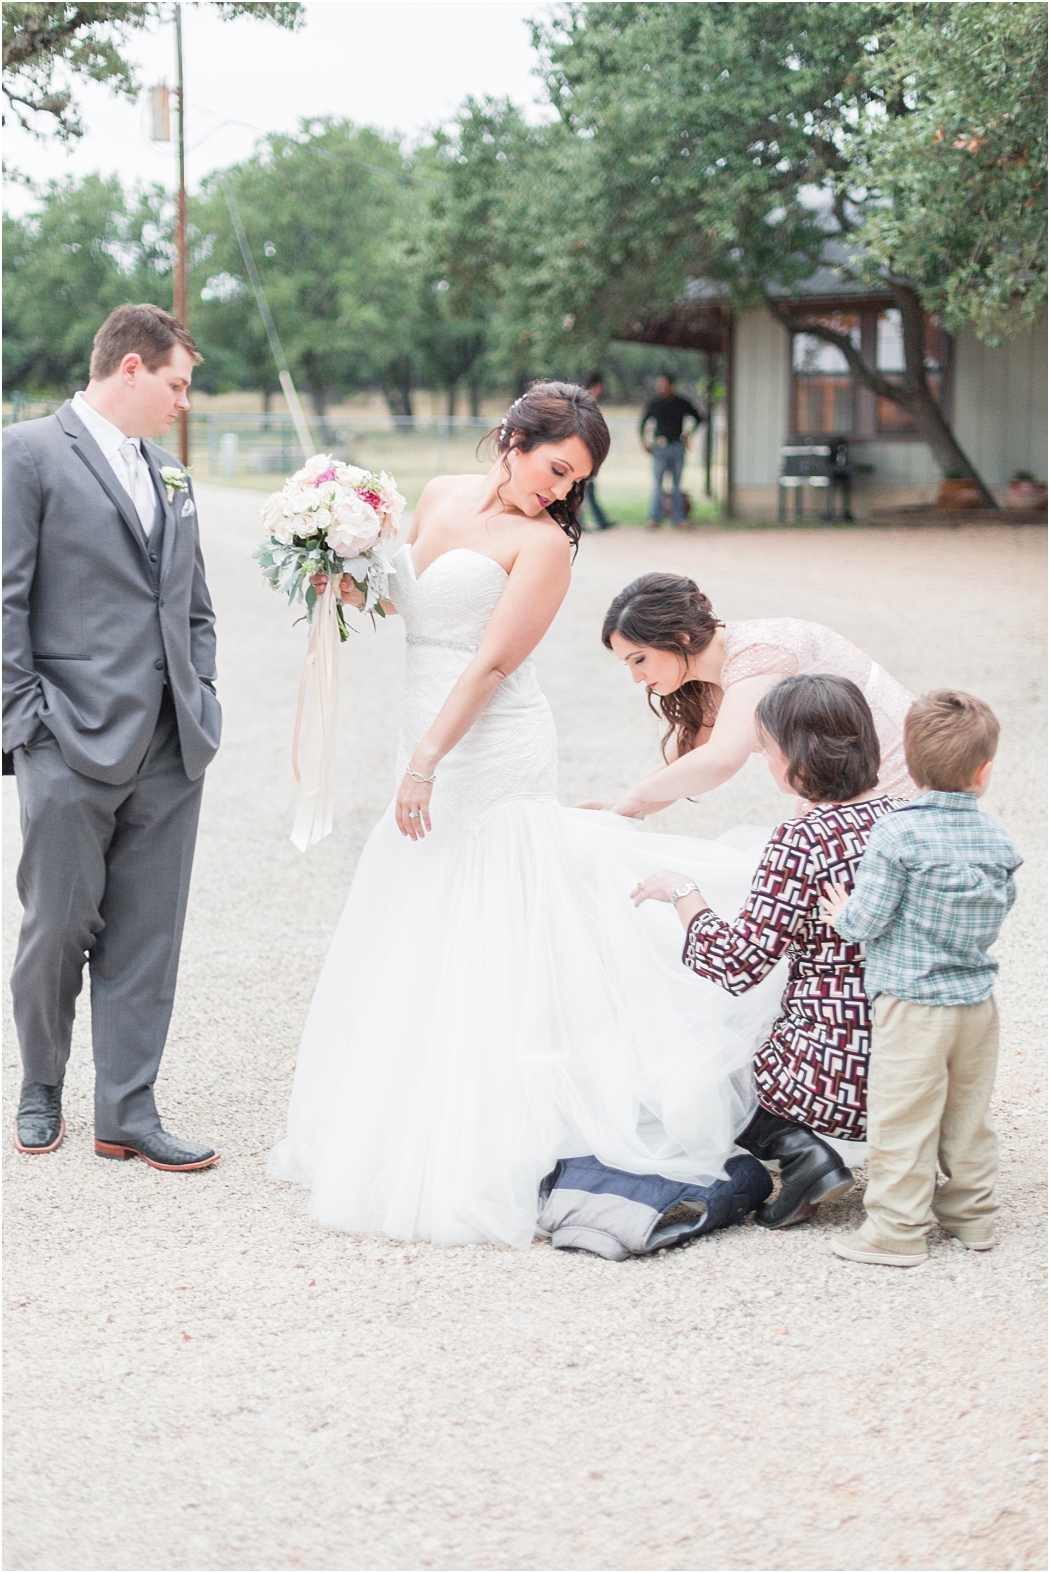 a-blush-cranberry-fall-wedding-at-cw-hill-country-ranch-in-boerne-texas-by-allison-jeffers-wedding-photography-boerne-wedding-photographer_0078